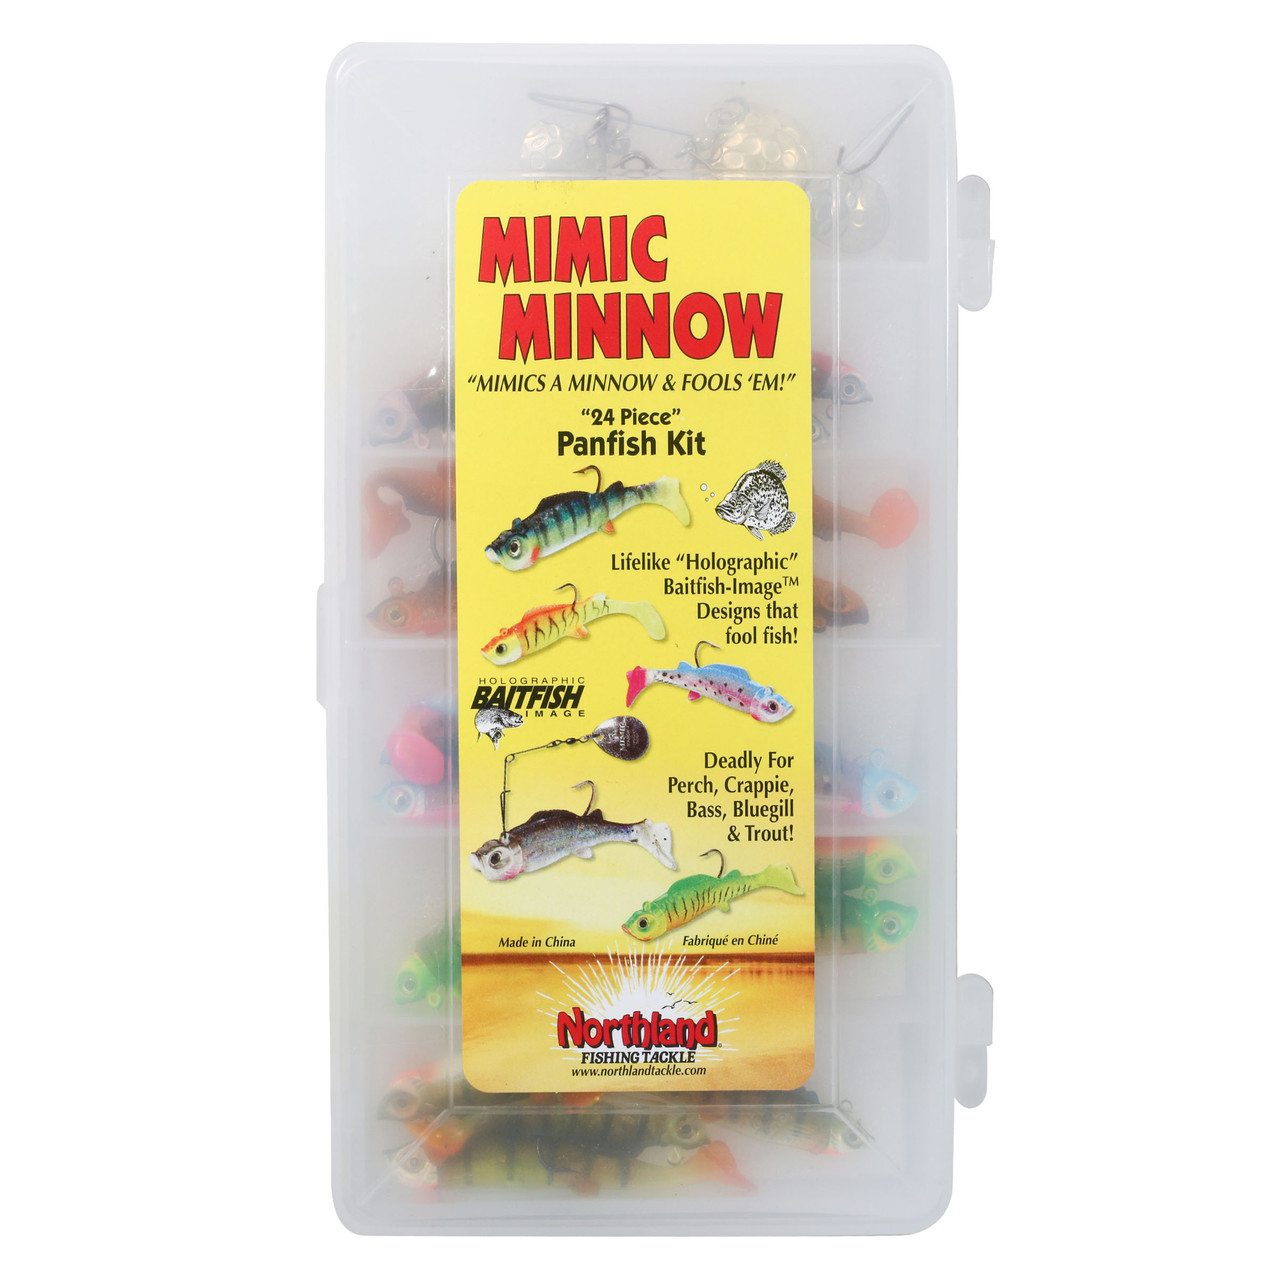 Crappie Magnet Best of The Best Kit, Fishing Equipment and